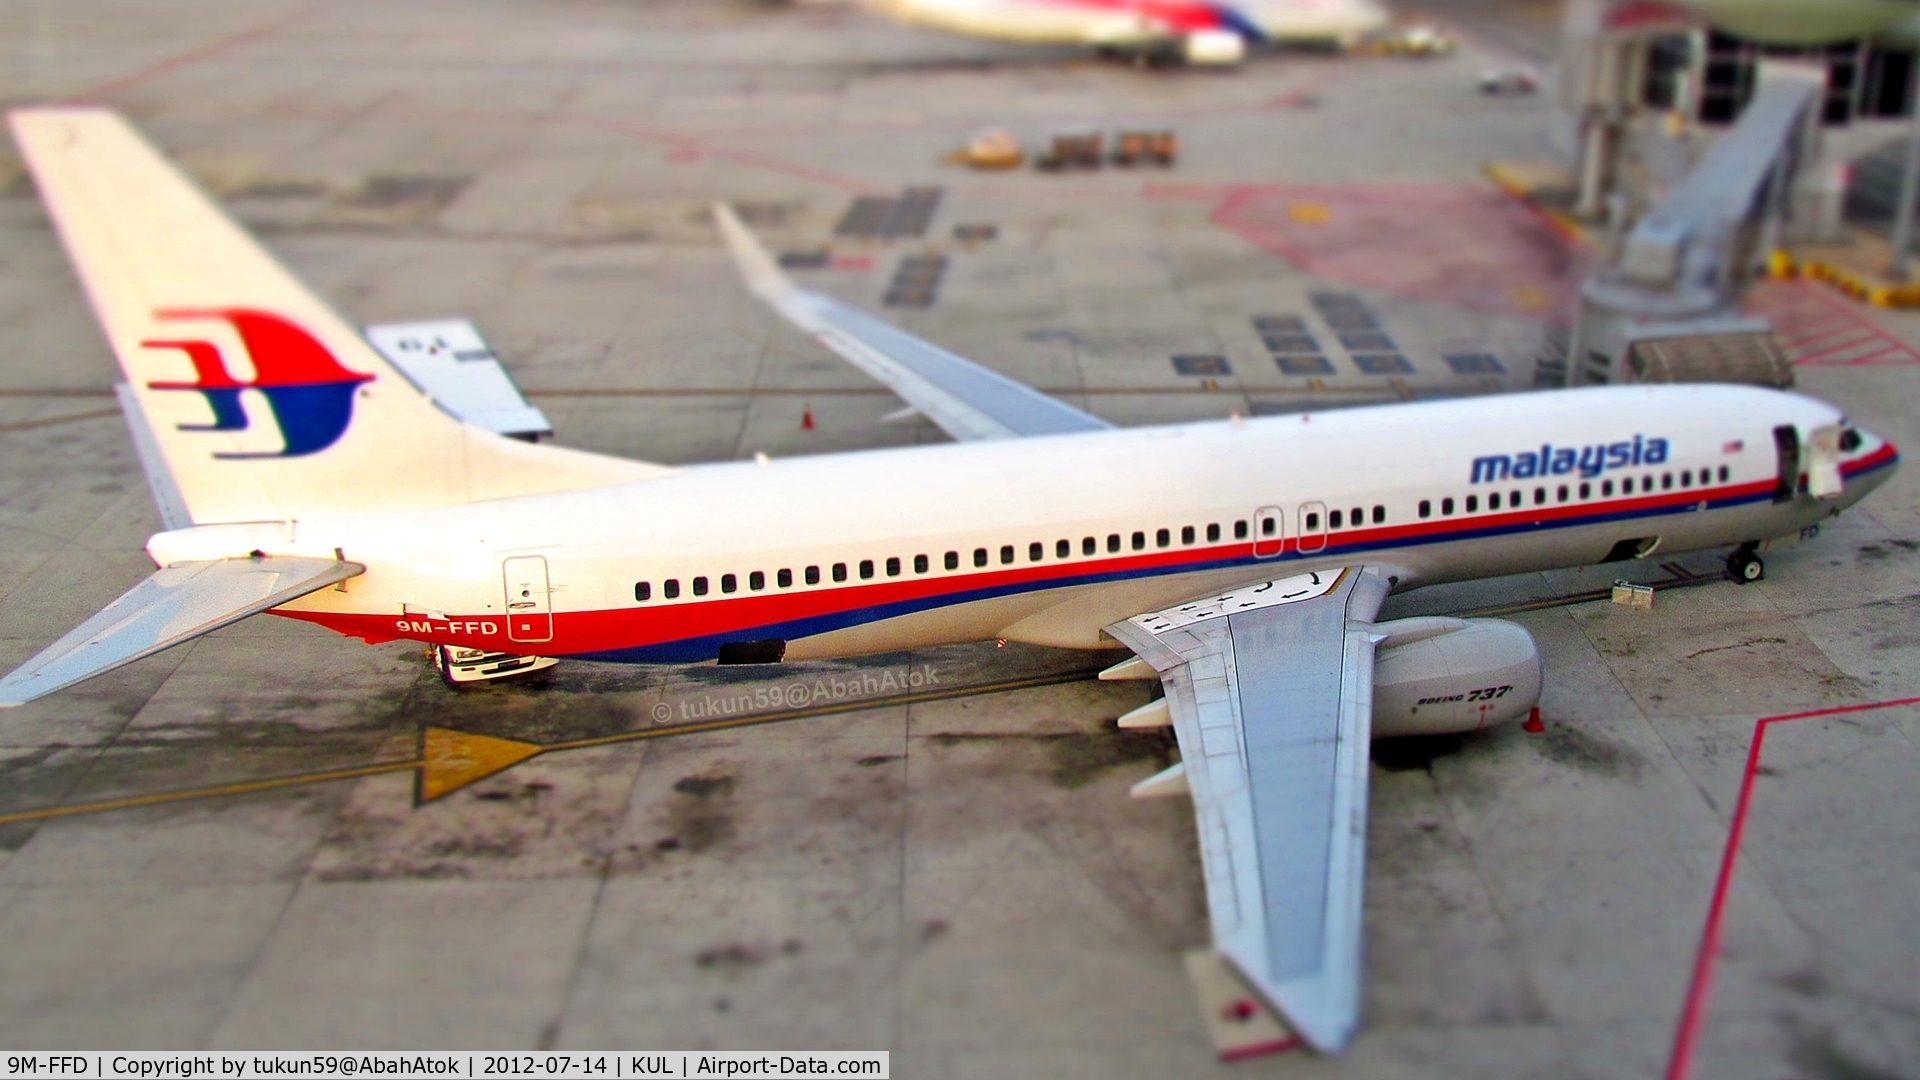 9M-FFD, 2000 Boeing 737-85F C/N 30007, Malaysia Airlines in miniature mode